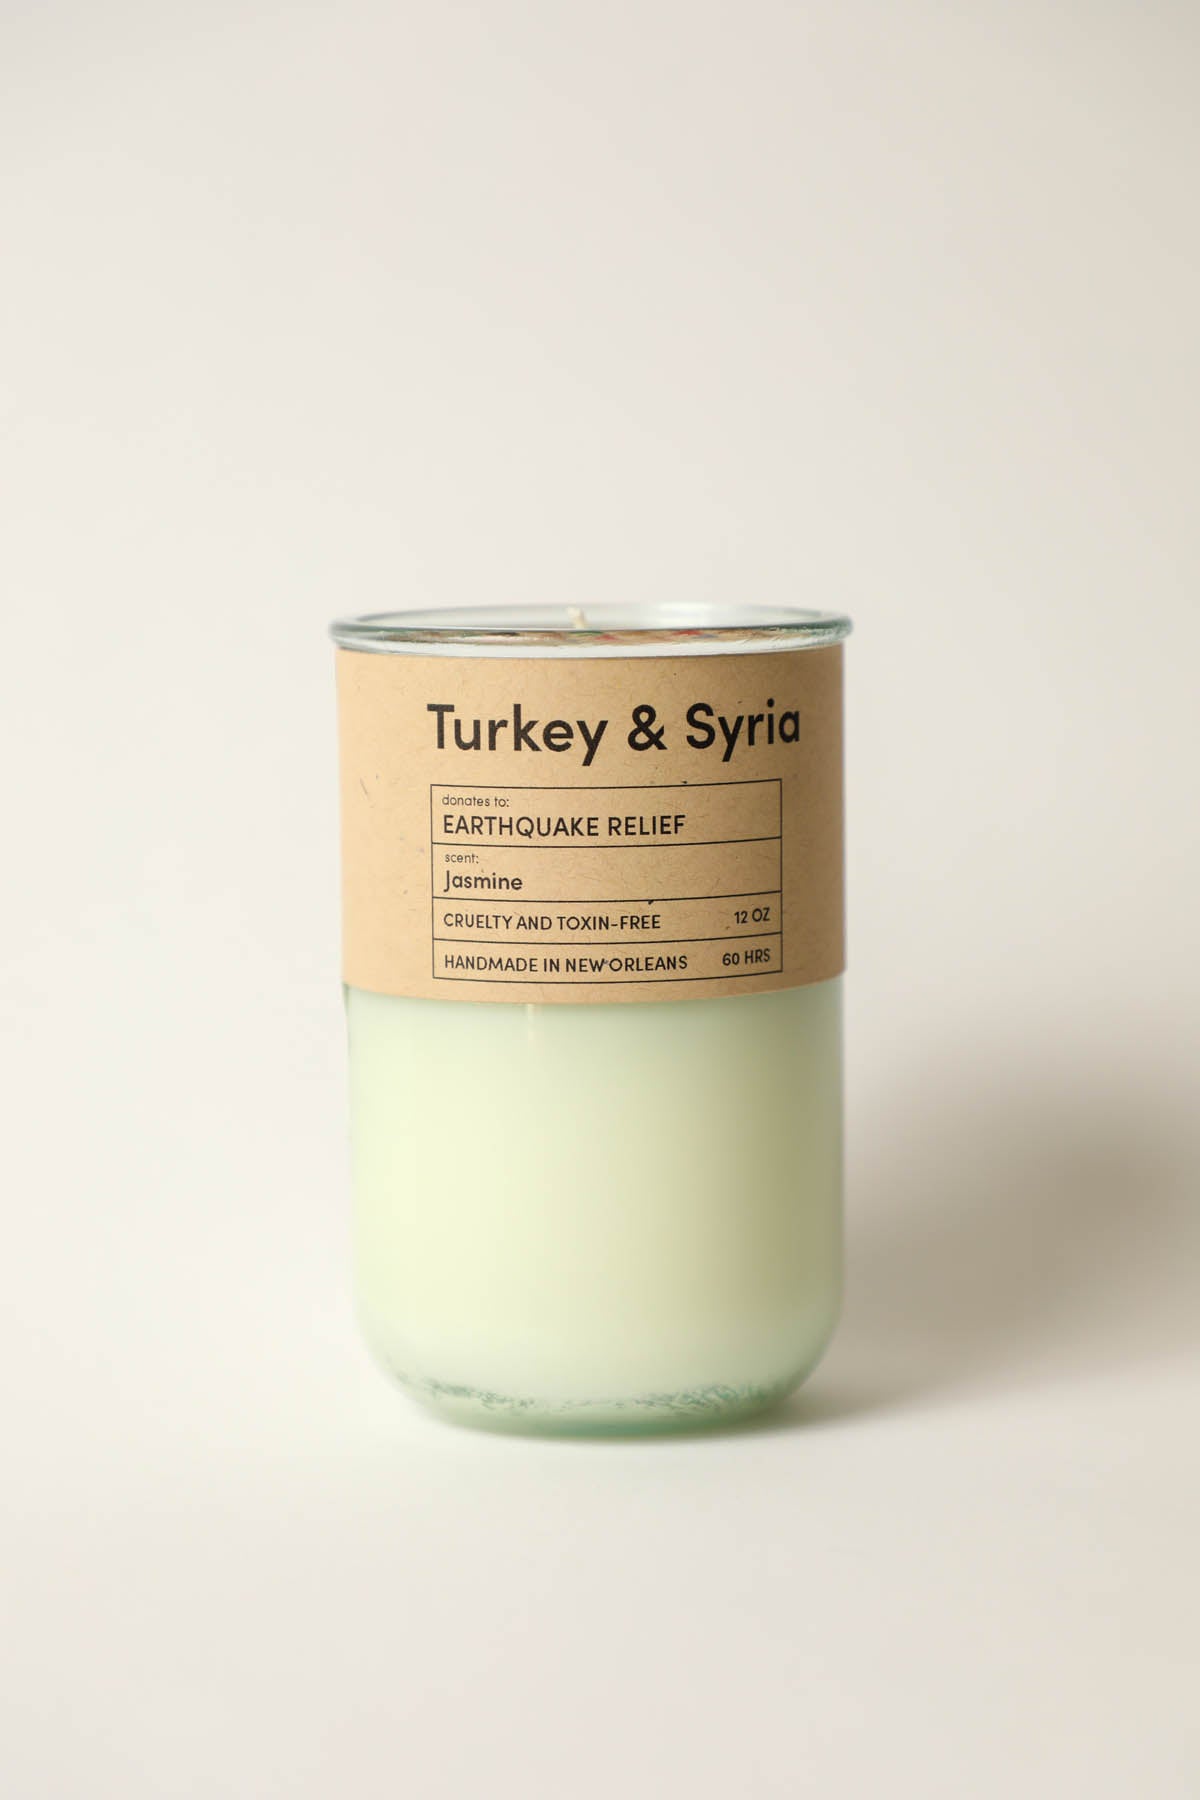 Rebuild, Turkey & Syria Earthquake Relief / Jasmine Scent: Candles for Good